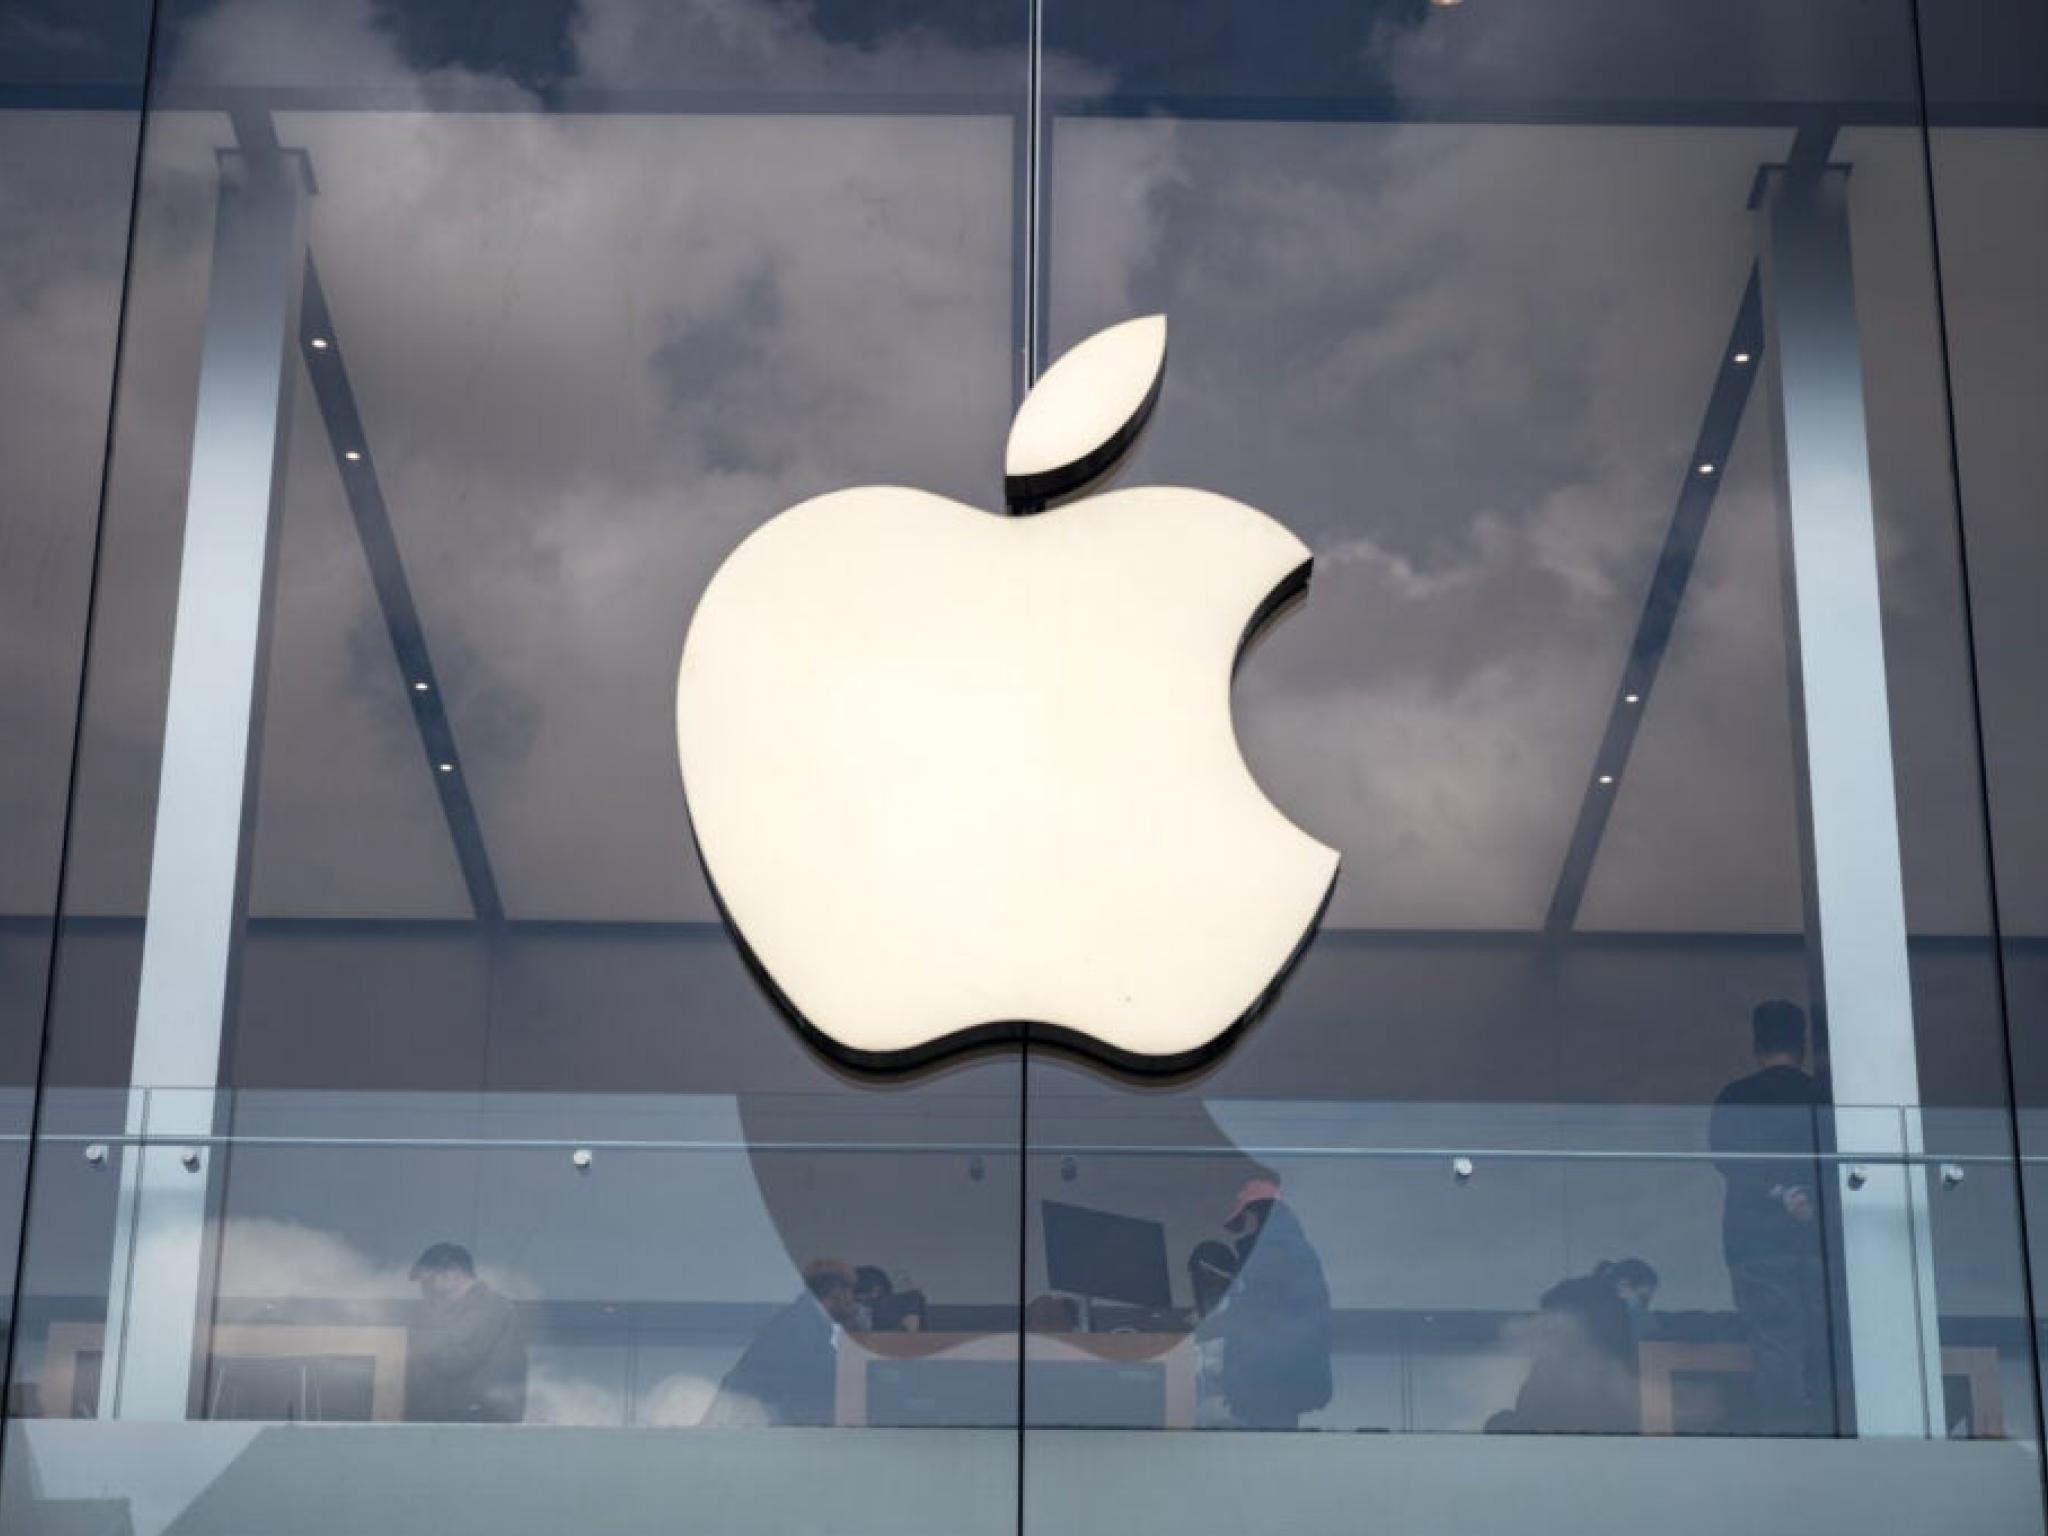  apple-to-rally-around-17-here-are-10-top-analyst-forecasts-for-friday 